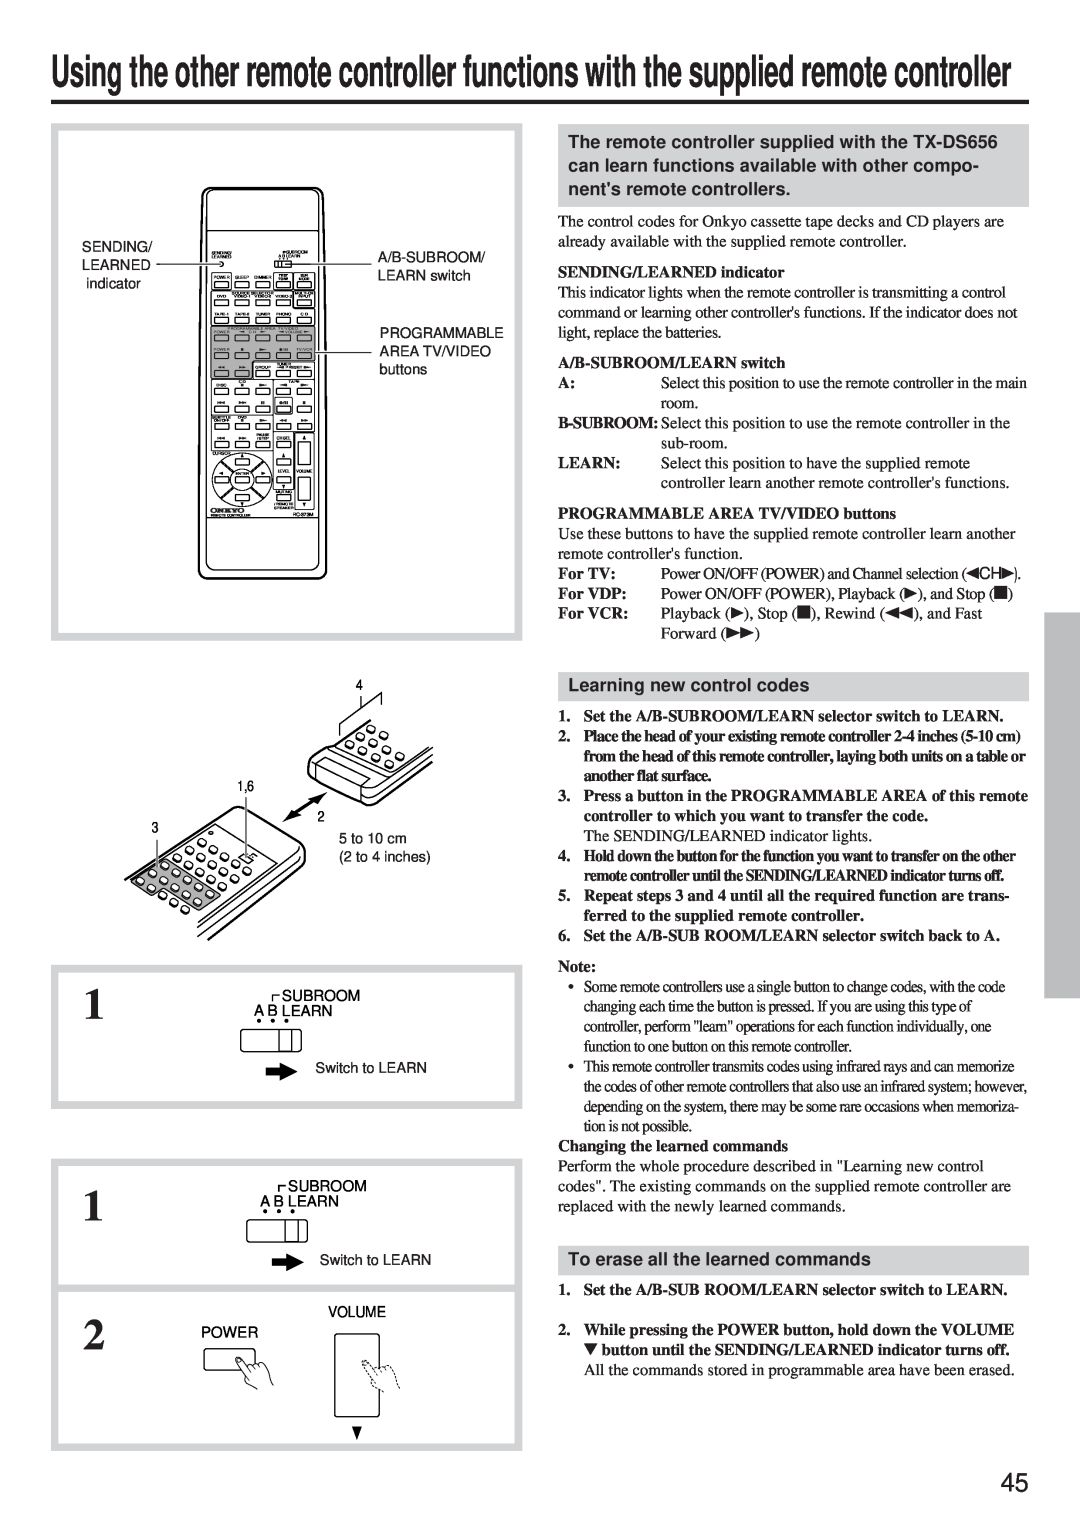 Onkyo TX-DS656 instruction manual Learning new control codes, To erase all the learned commands 